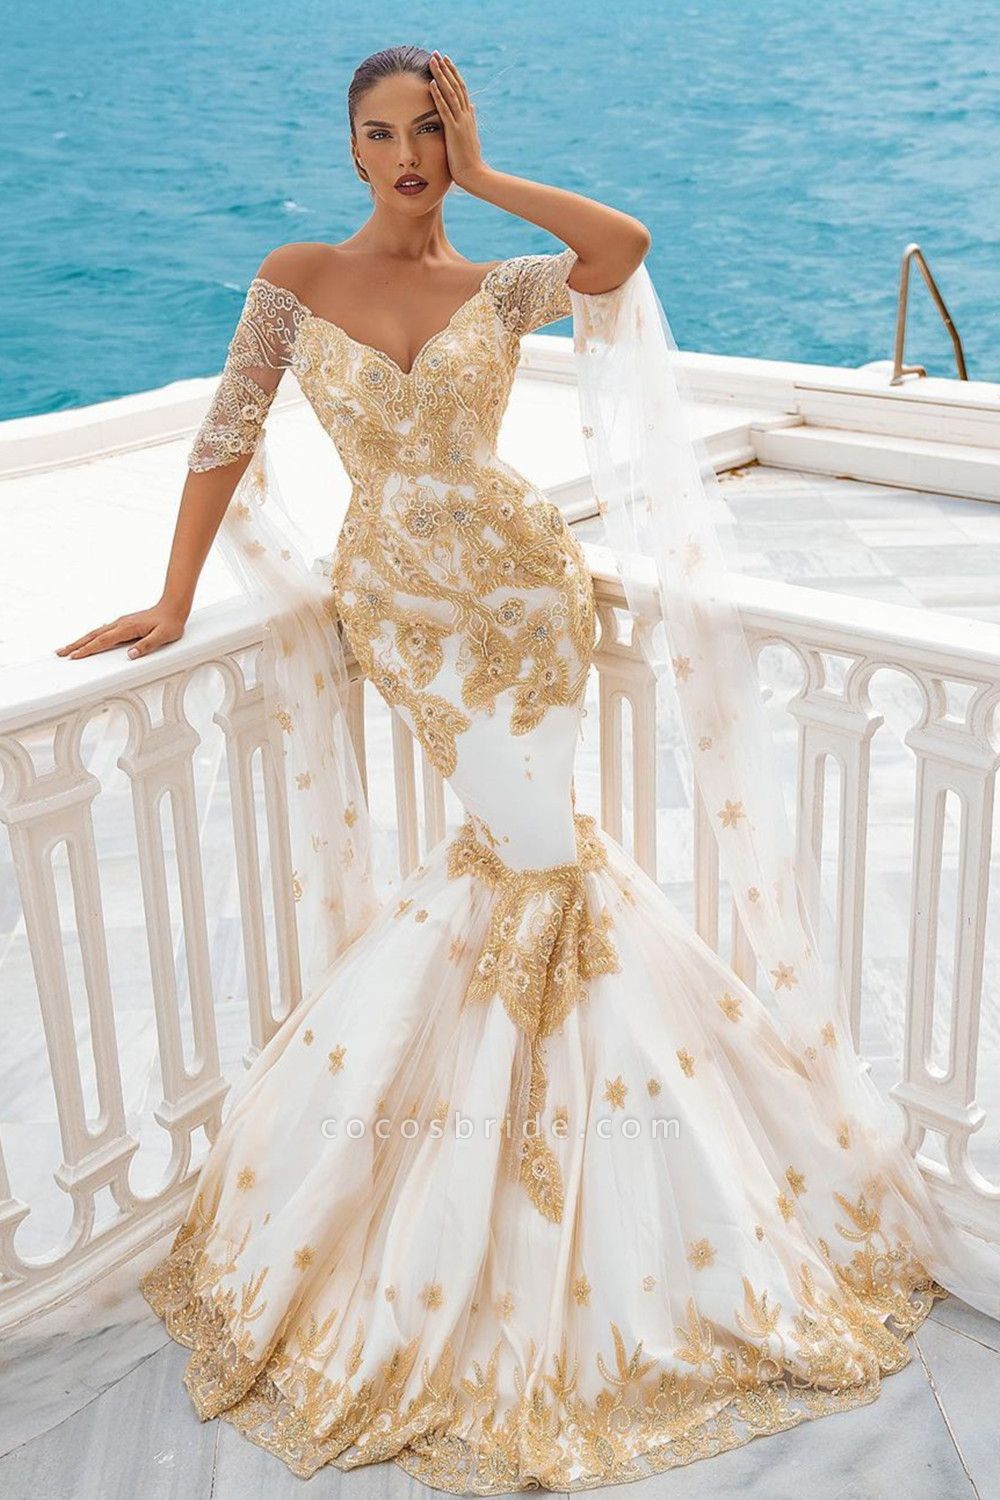 Long Mermaid Off the Shoulder Gold Appliques Lace Wedding Dress with Half Sleeve Cape